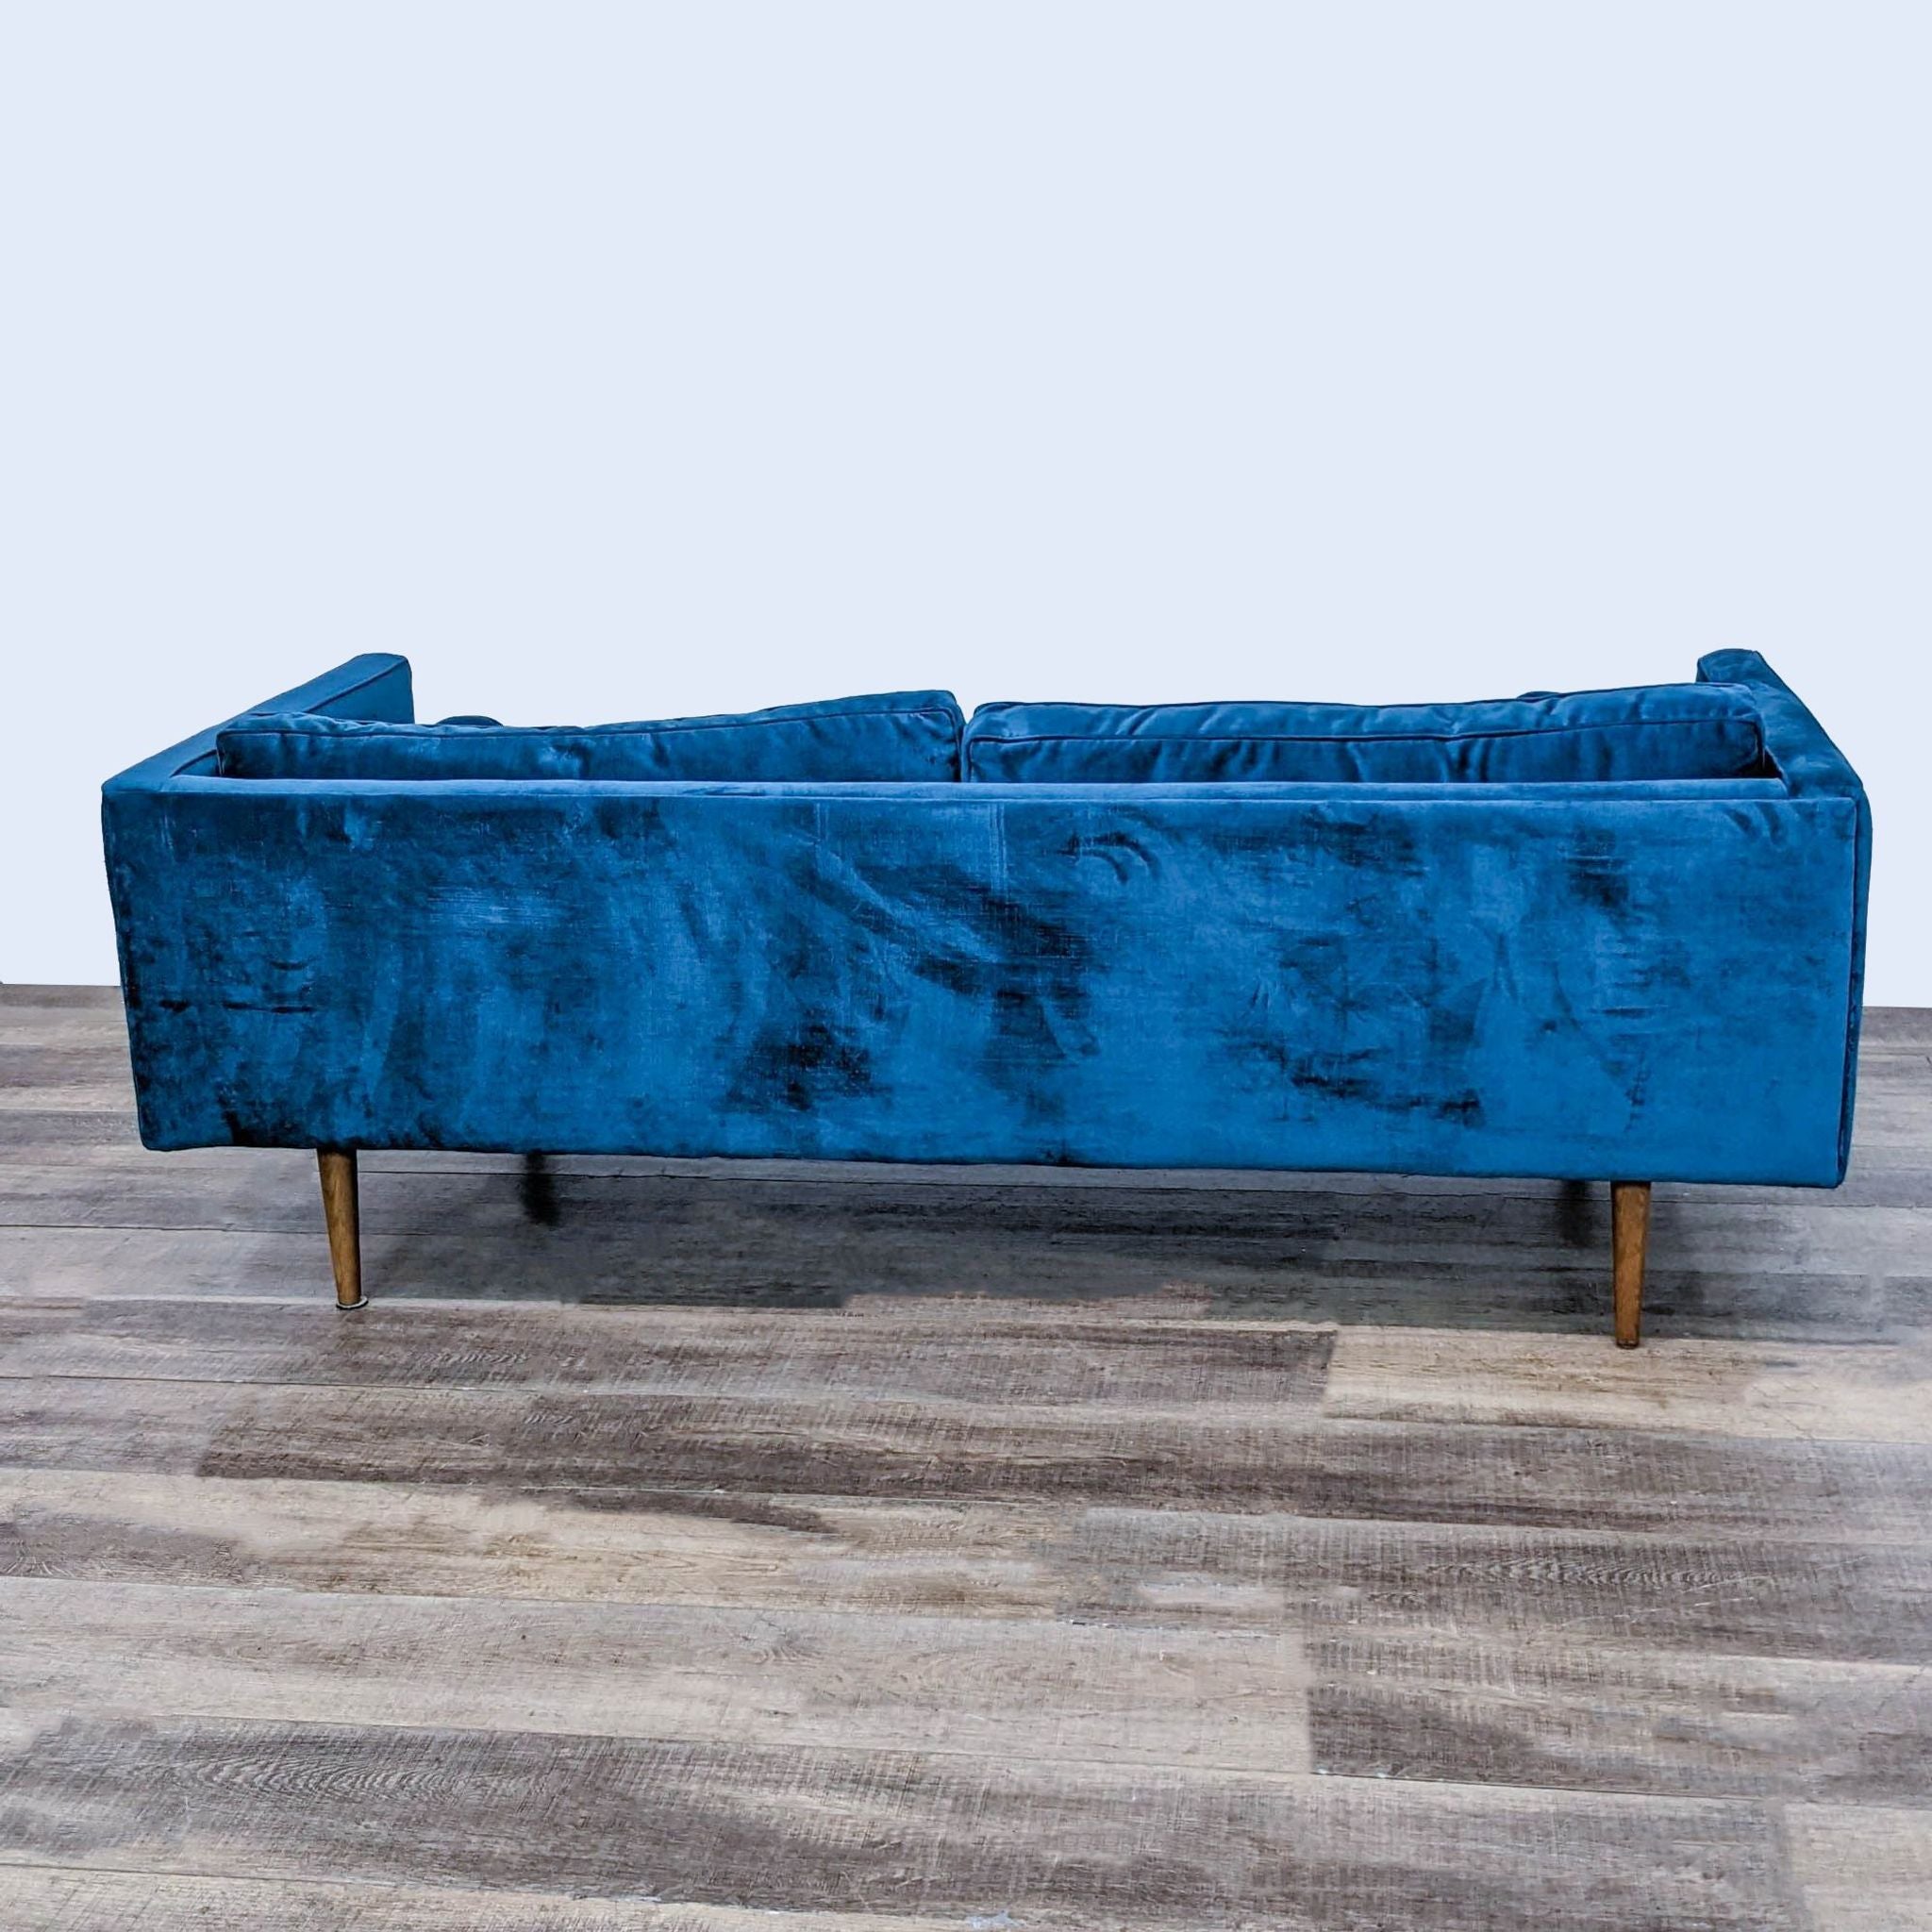 3. Side view showing the sleek design of a West Elm 3-seat blue velvet couch with tapered wooden legs.